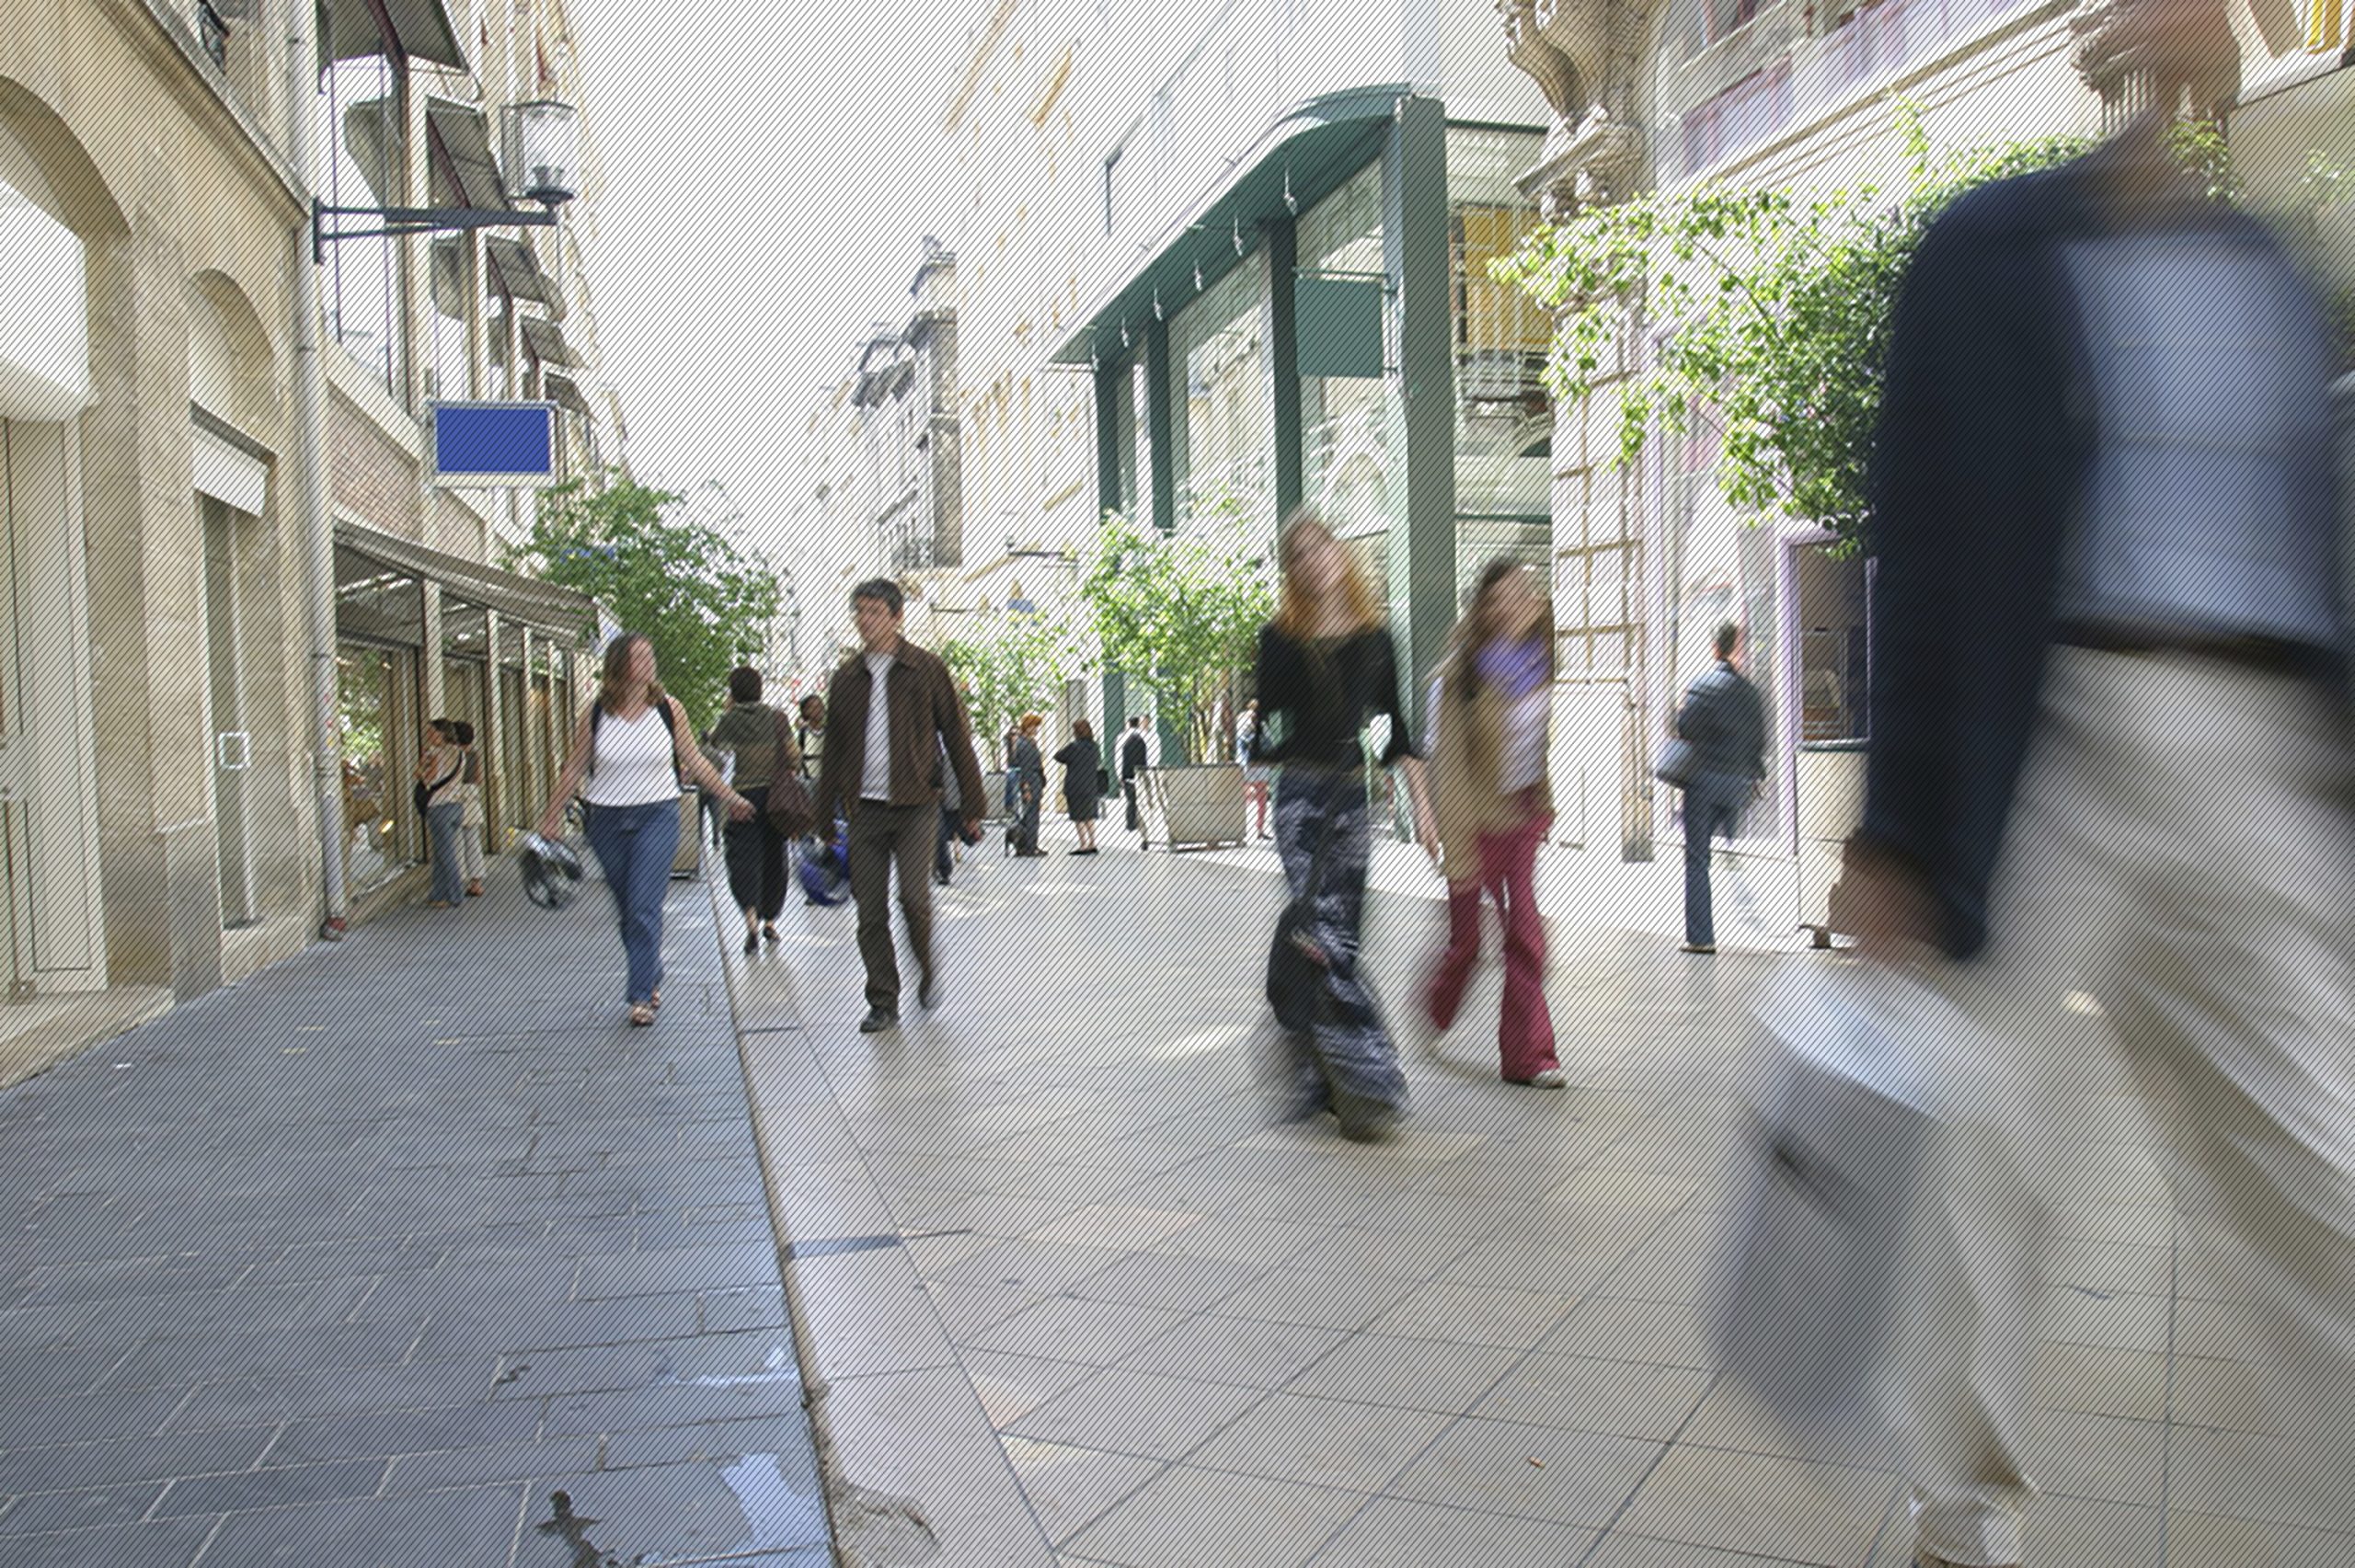 Featured image: People walking in an outdoor shopping center - Read full post: Lead or Follow? How a Future-State-First Strategy Enables Customer Experience Innovation